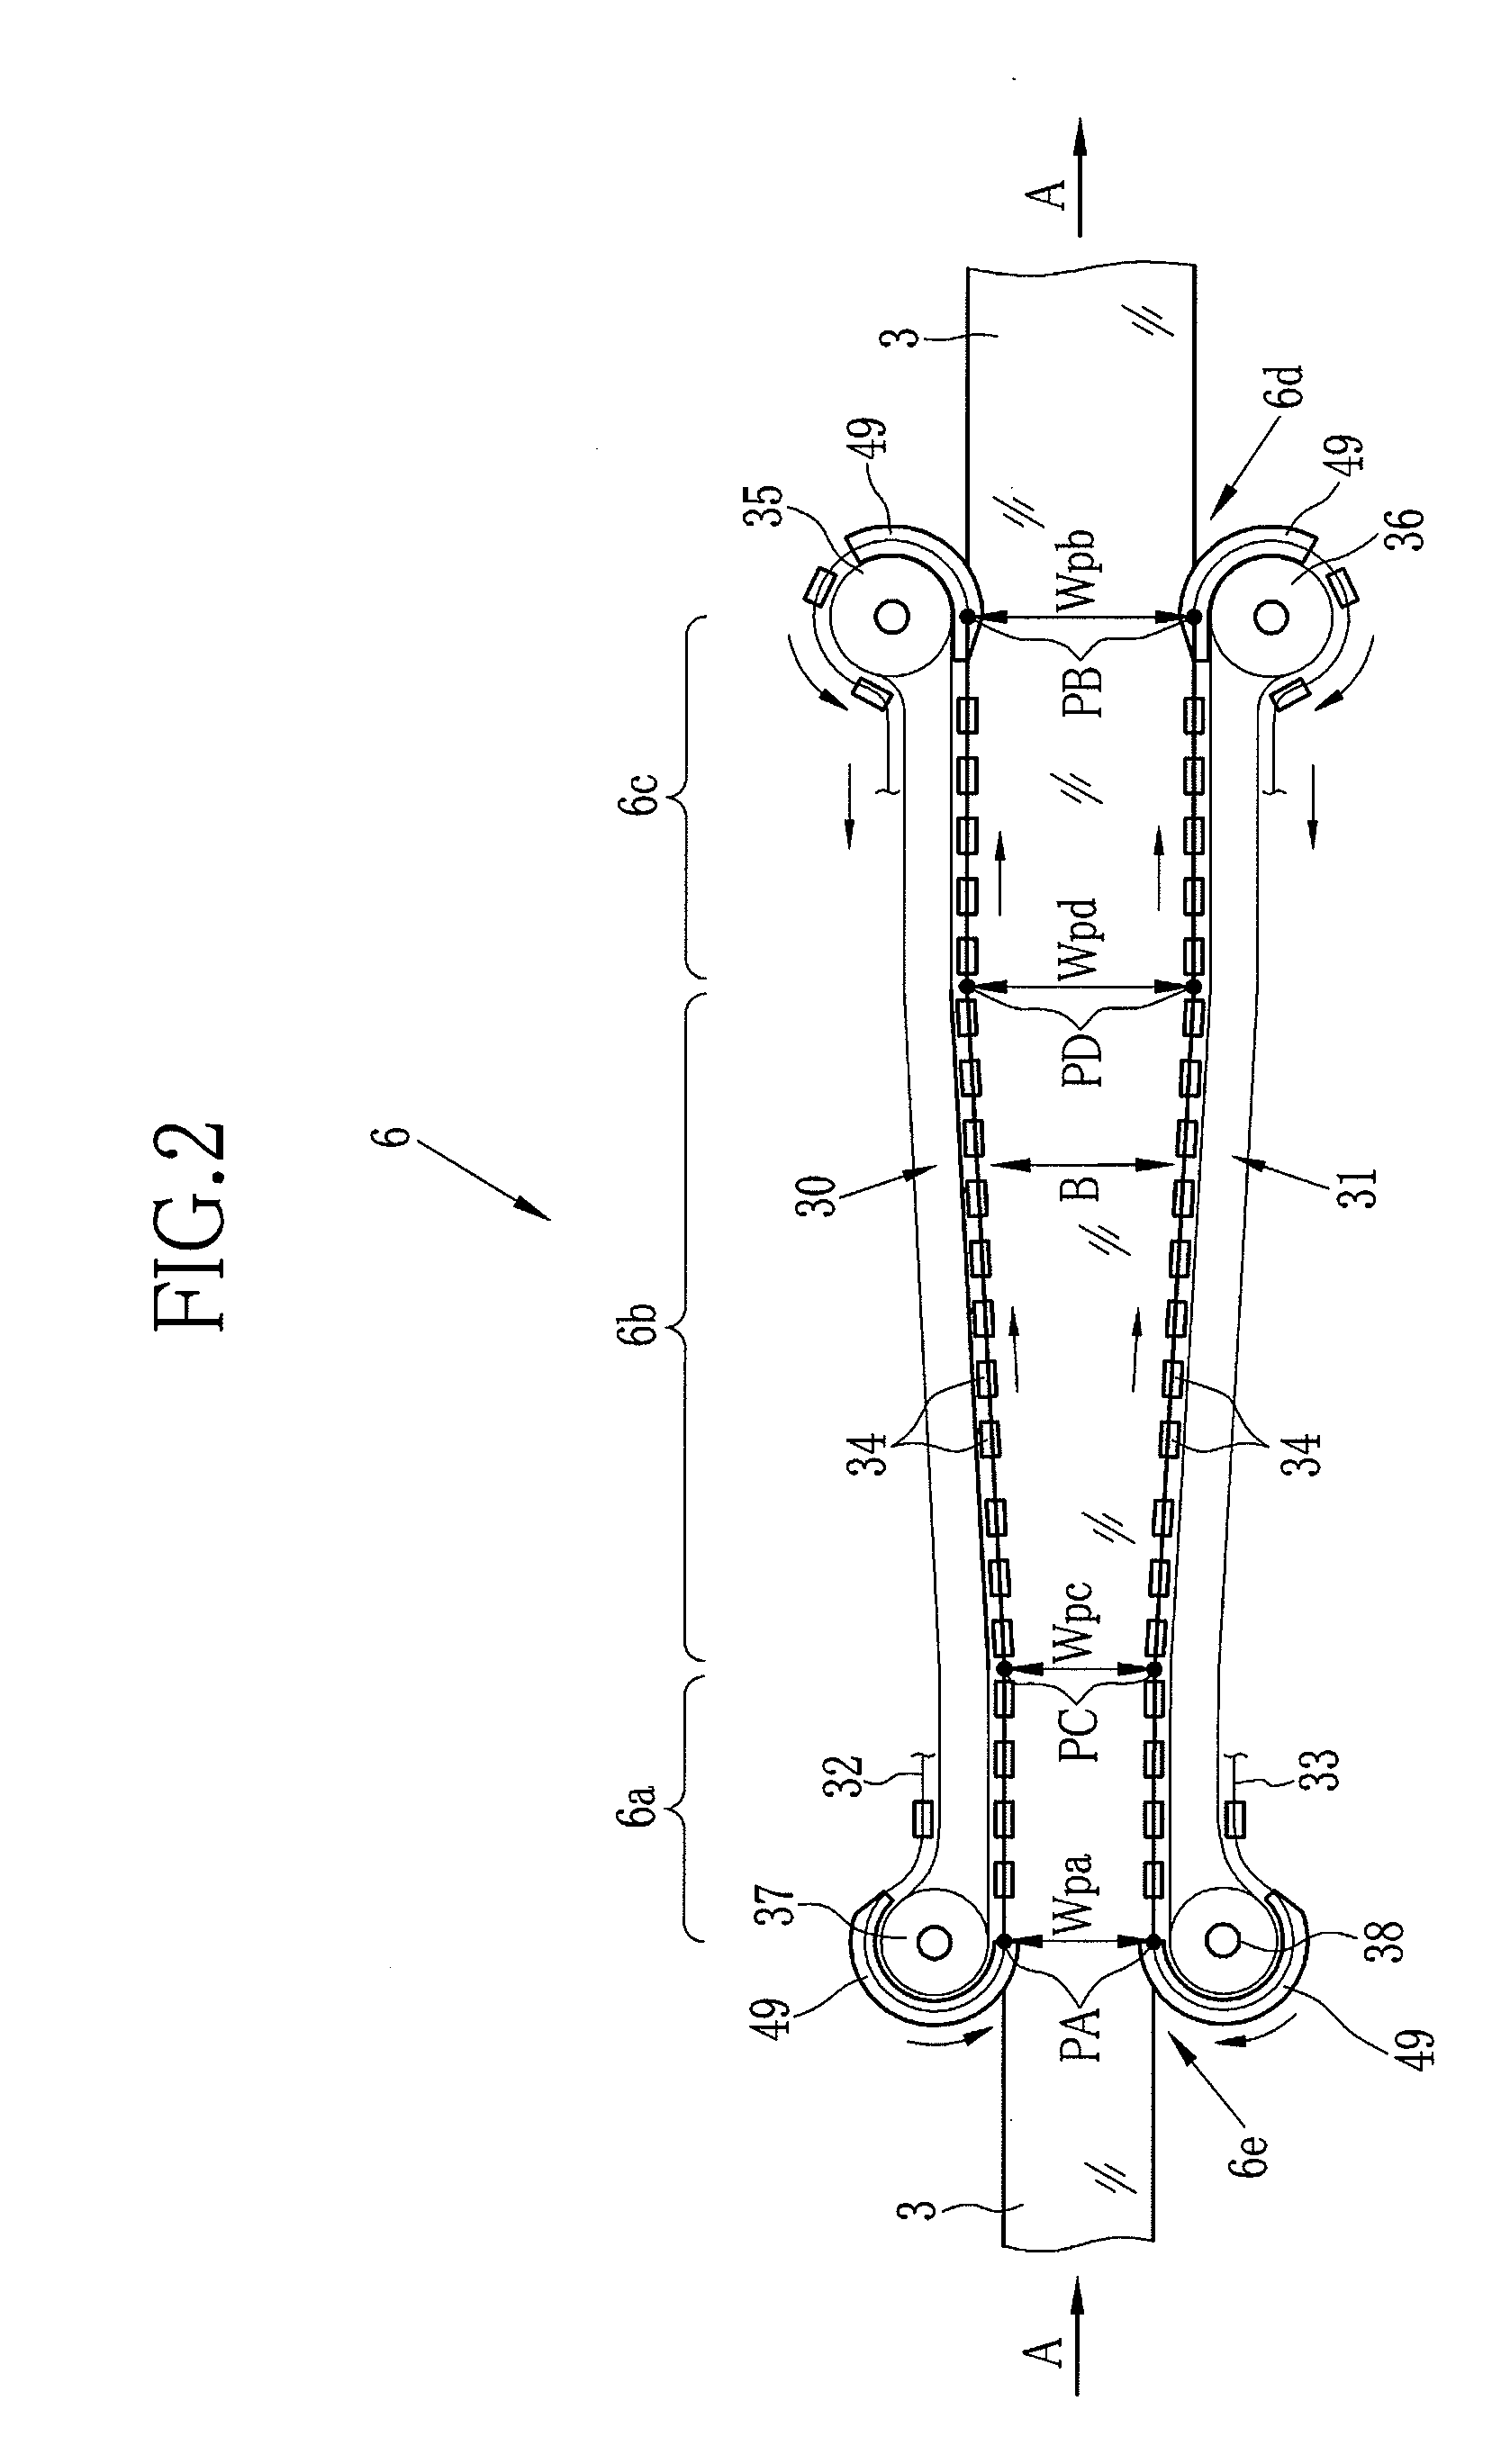 Method and apparatus for continuously stretching polymer films